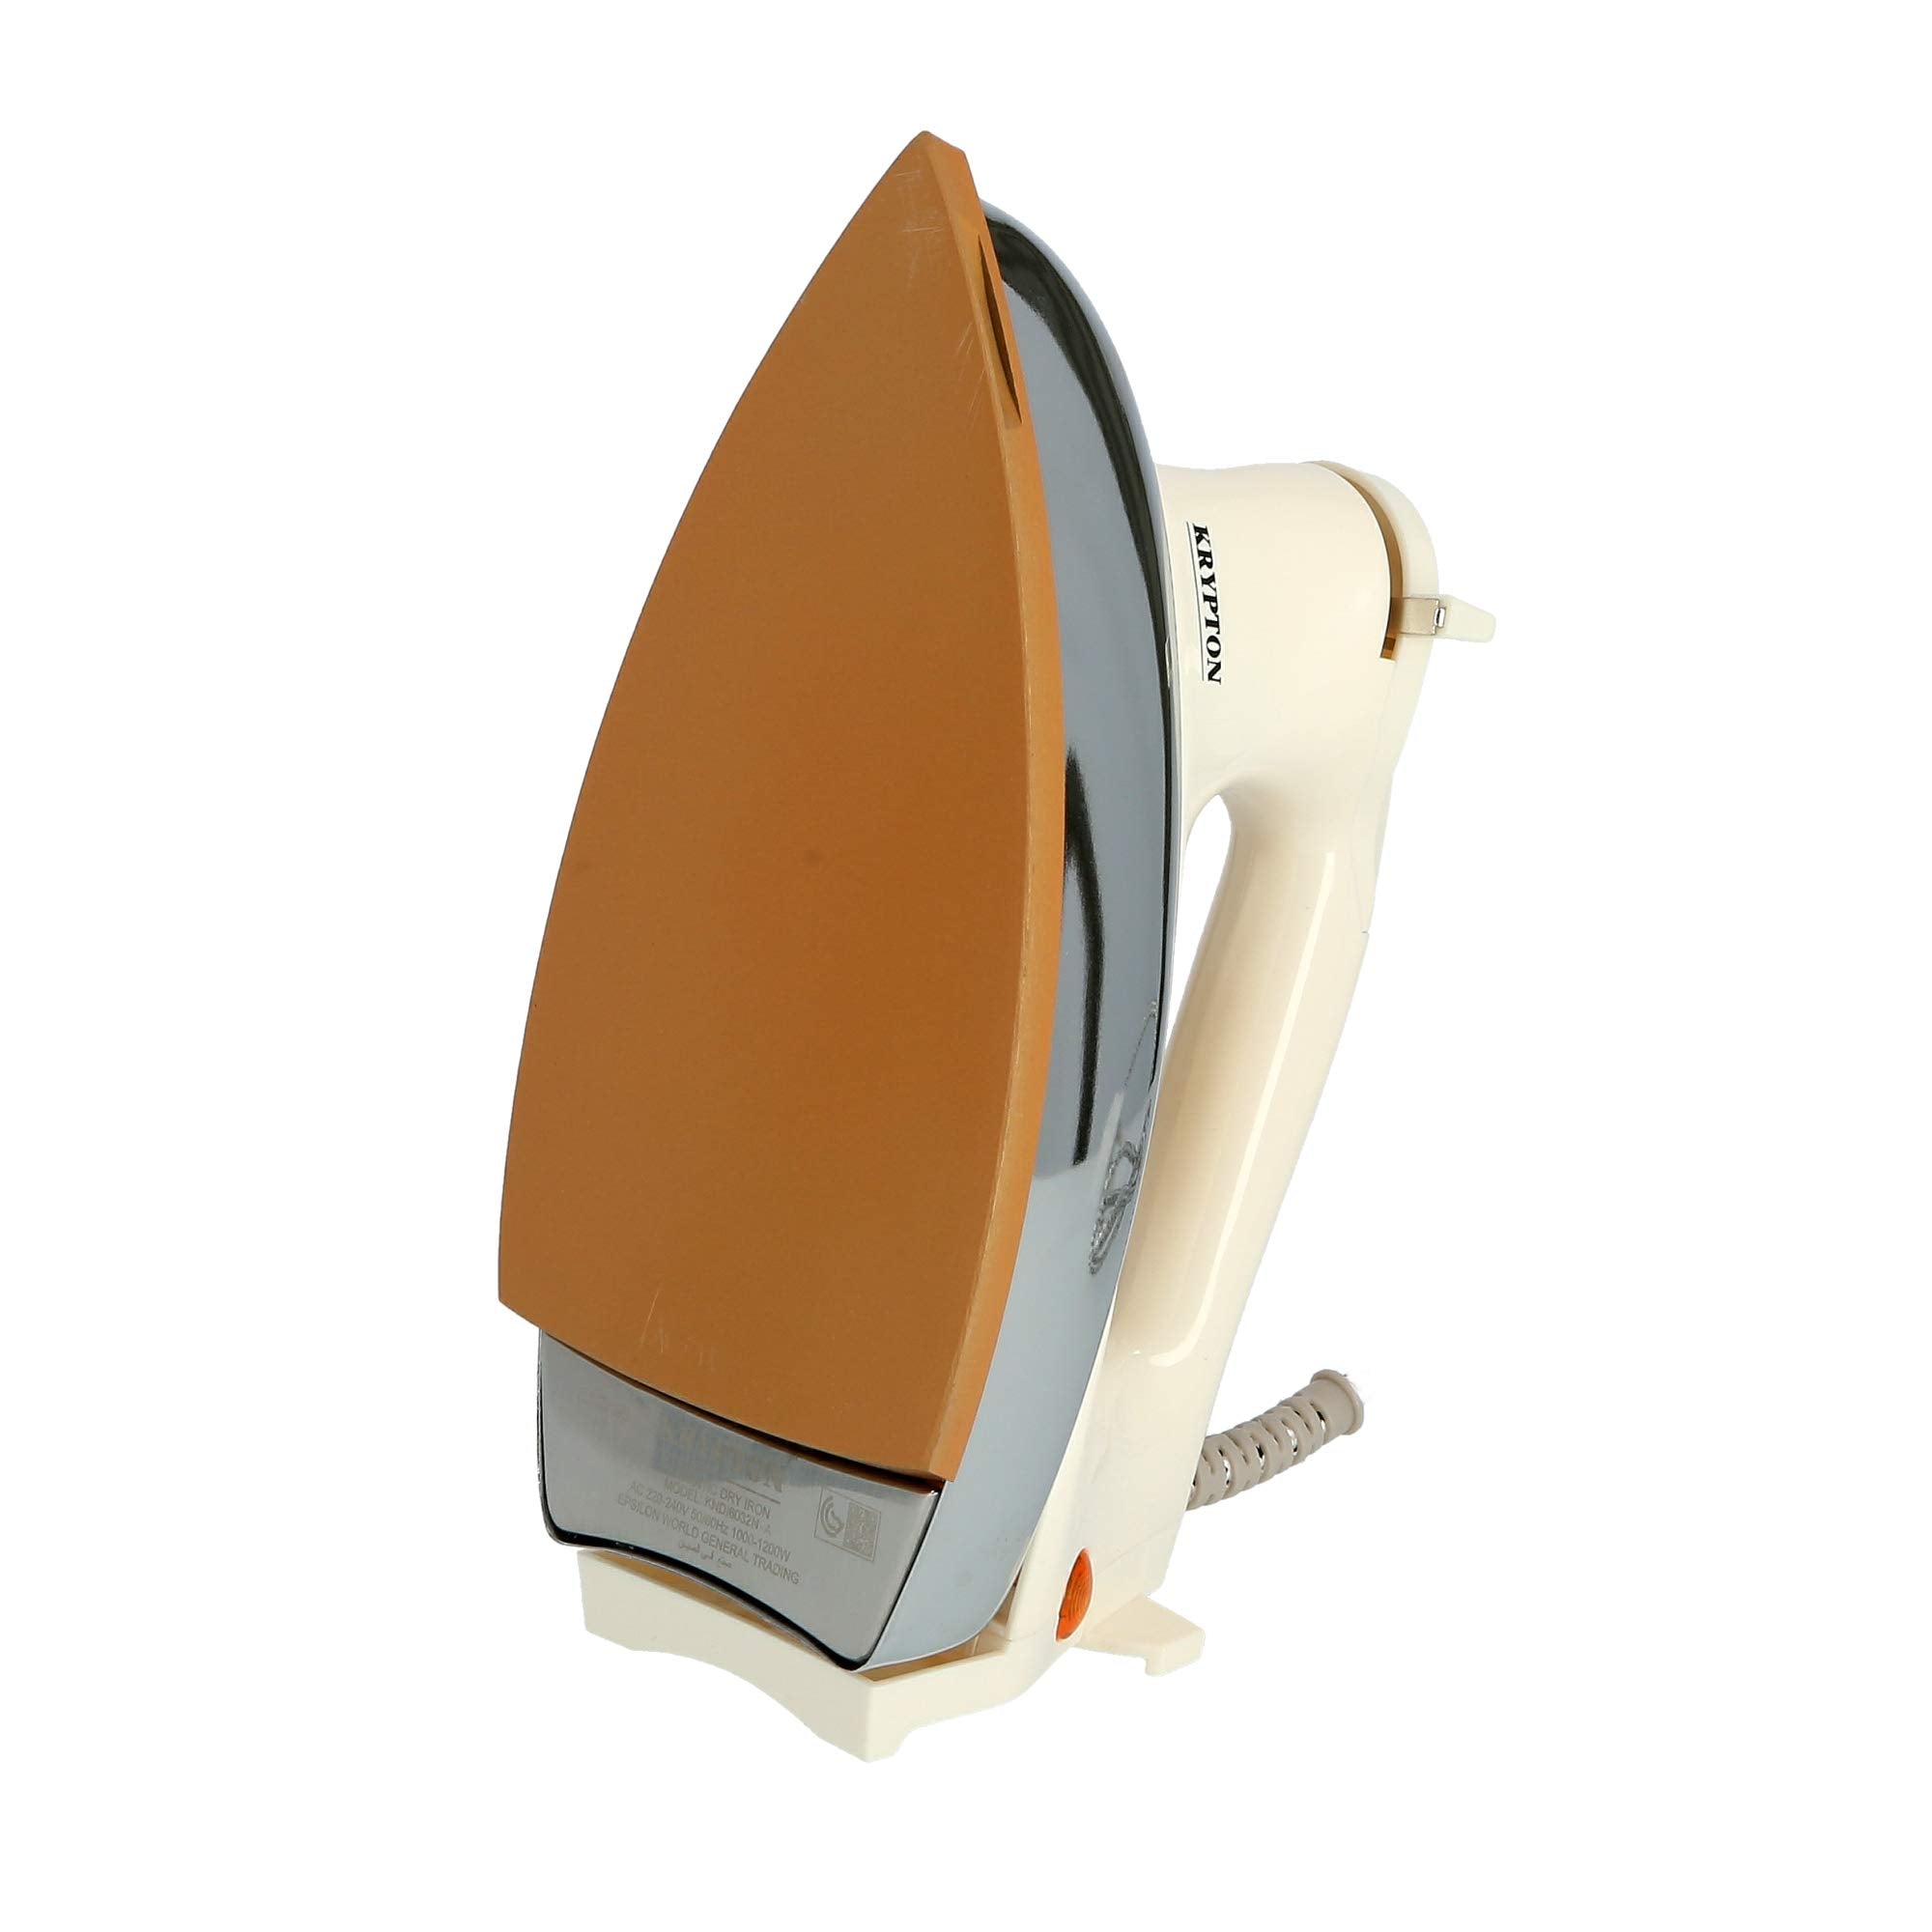 Krypton Automatic Dry Iron with Temperature Control White & Gold | reliable performance | lightweight | variable steam settings | safety features | stylish | even heat distribution | Halabh.com